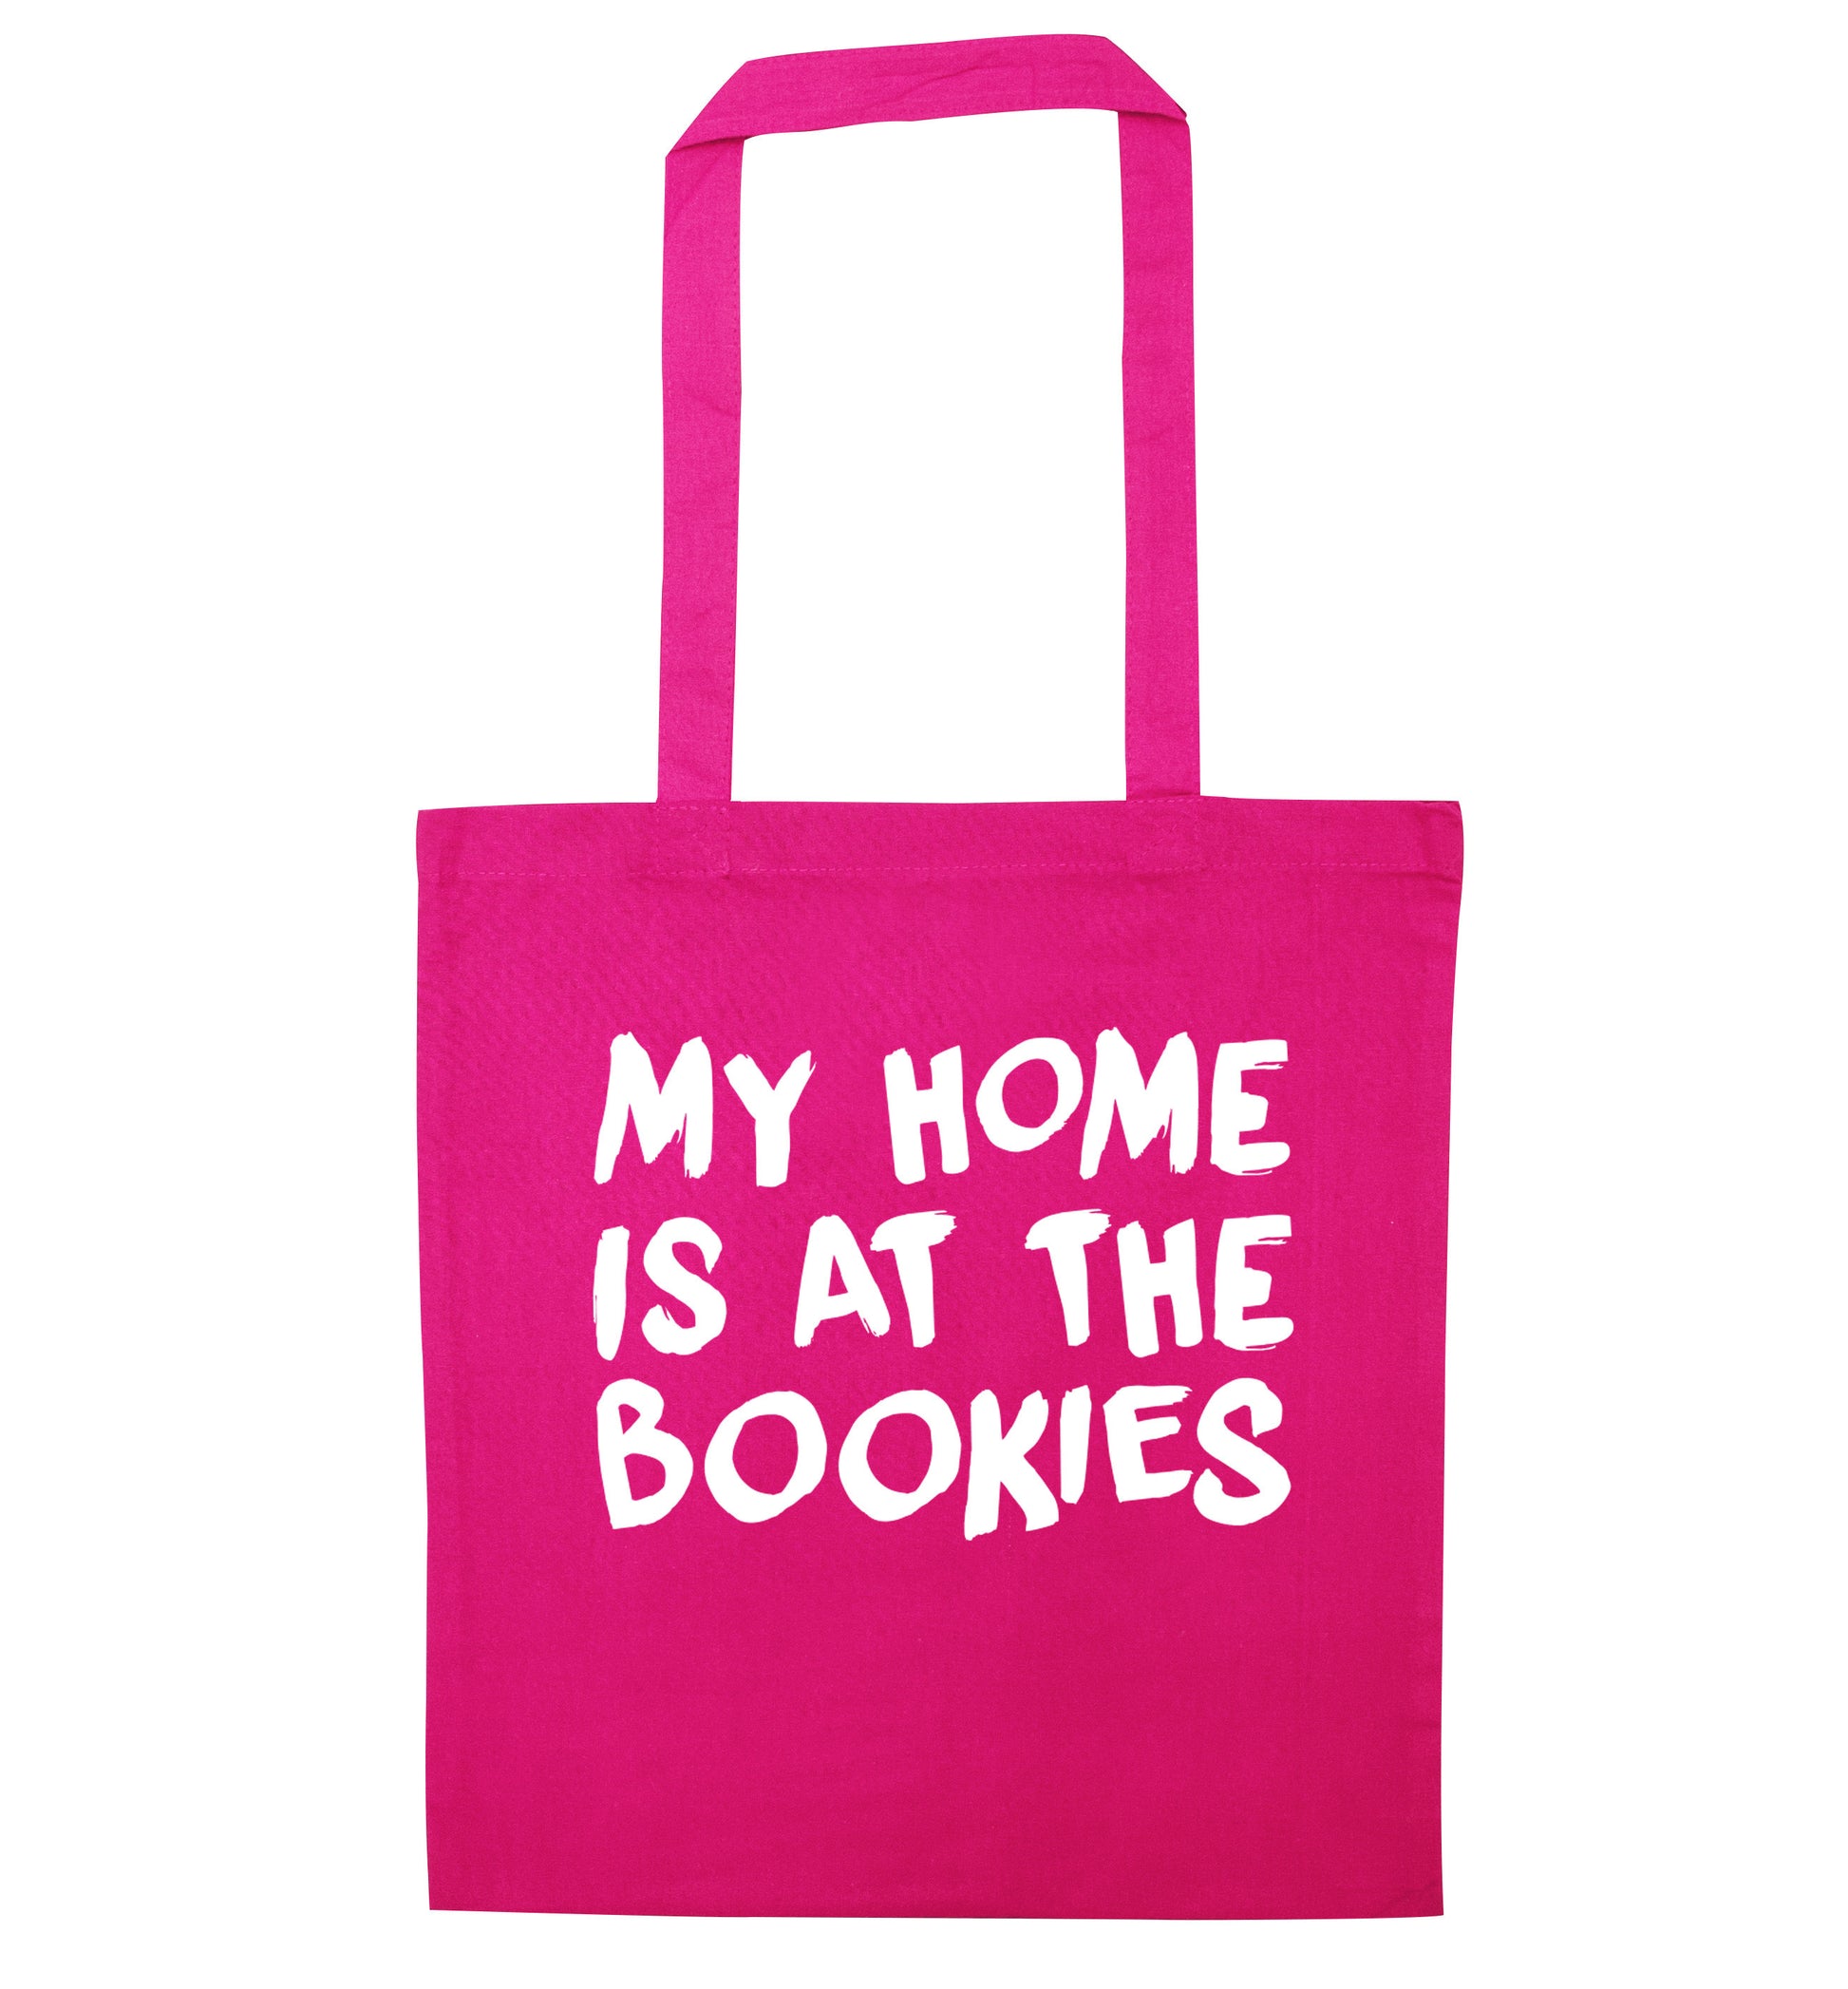 My home is at the bookies pink tote bag